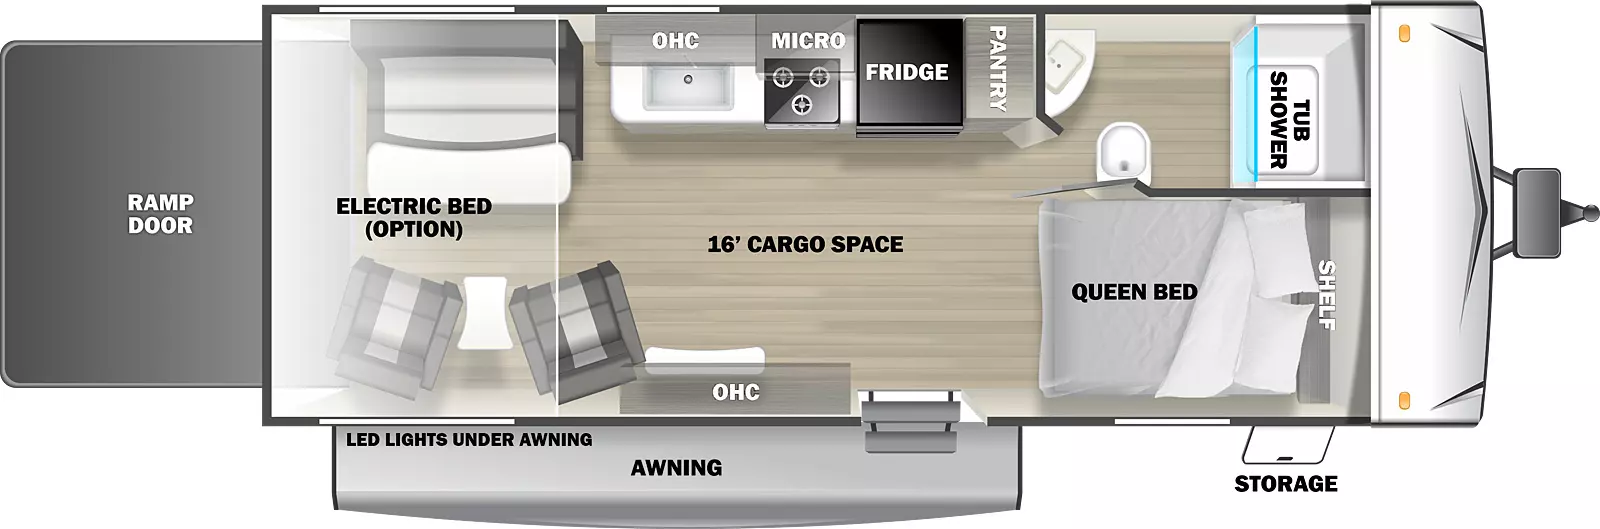 The Sandstorm 186 Toy Hauler has one entry door, one rear ramp door and an electric power awning. It has sixteen feet of cargo space. Exterior storage is toward the front of the RV. The entry door opens into the living area. Directly to the left of the entry door are overhead storage compartments. To the left of the overhead storage compartments are two chairs with a table in the middle. A ramp door forms the rear wall of the RV. On the off door side, opposite the two chairs, is a flip sofa with a table. A kitchen area is in the front off door corner of the living area. The kitchen has a countertop with a sink and a stove. Overhead storage is above the sink and a microwave is above the stove. A refrigerator is to the right of the countertop. A pantry is to the right of the refrigerator. A bathroom is in the front off door corner of the RV. The bathroom has a sink, a toilet, and a tub shower. The front door side corner has a full bed with a shelf above it.